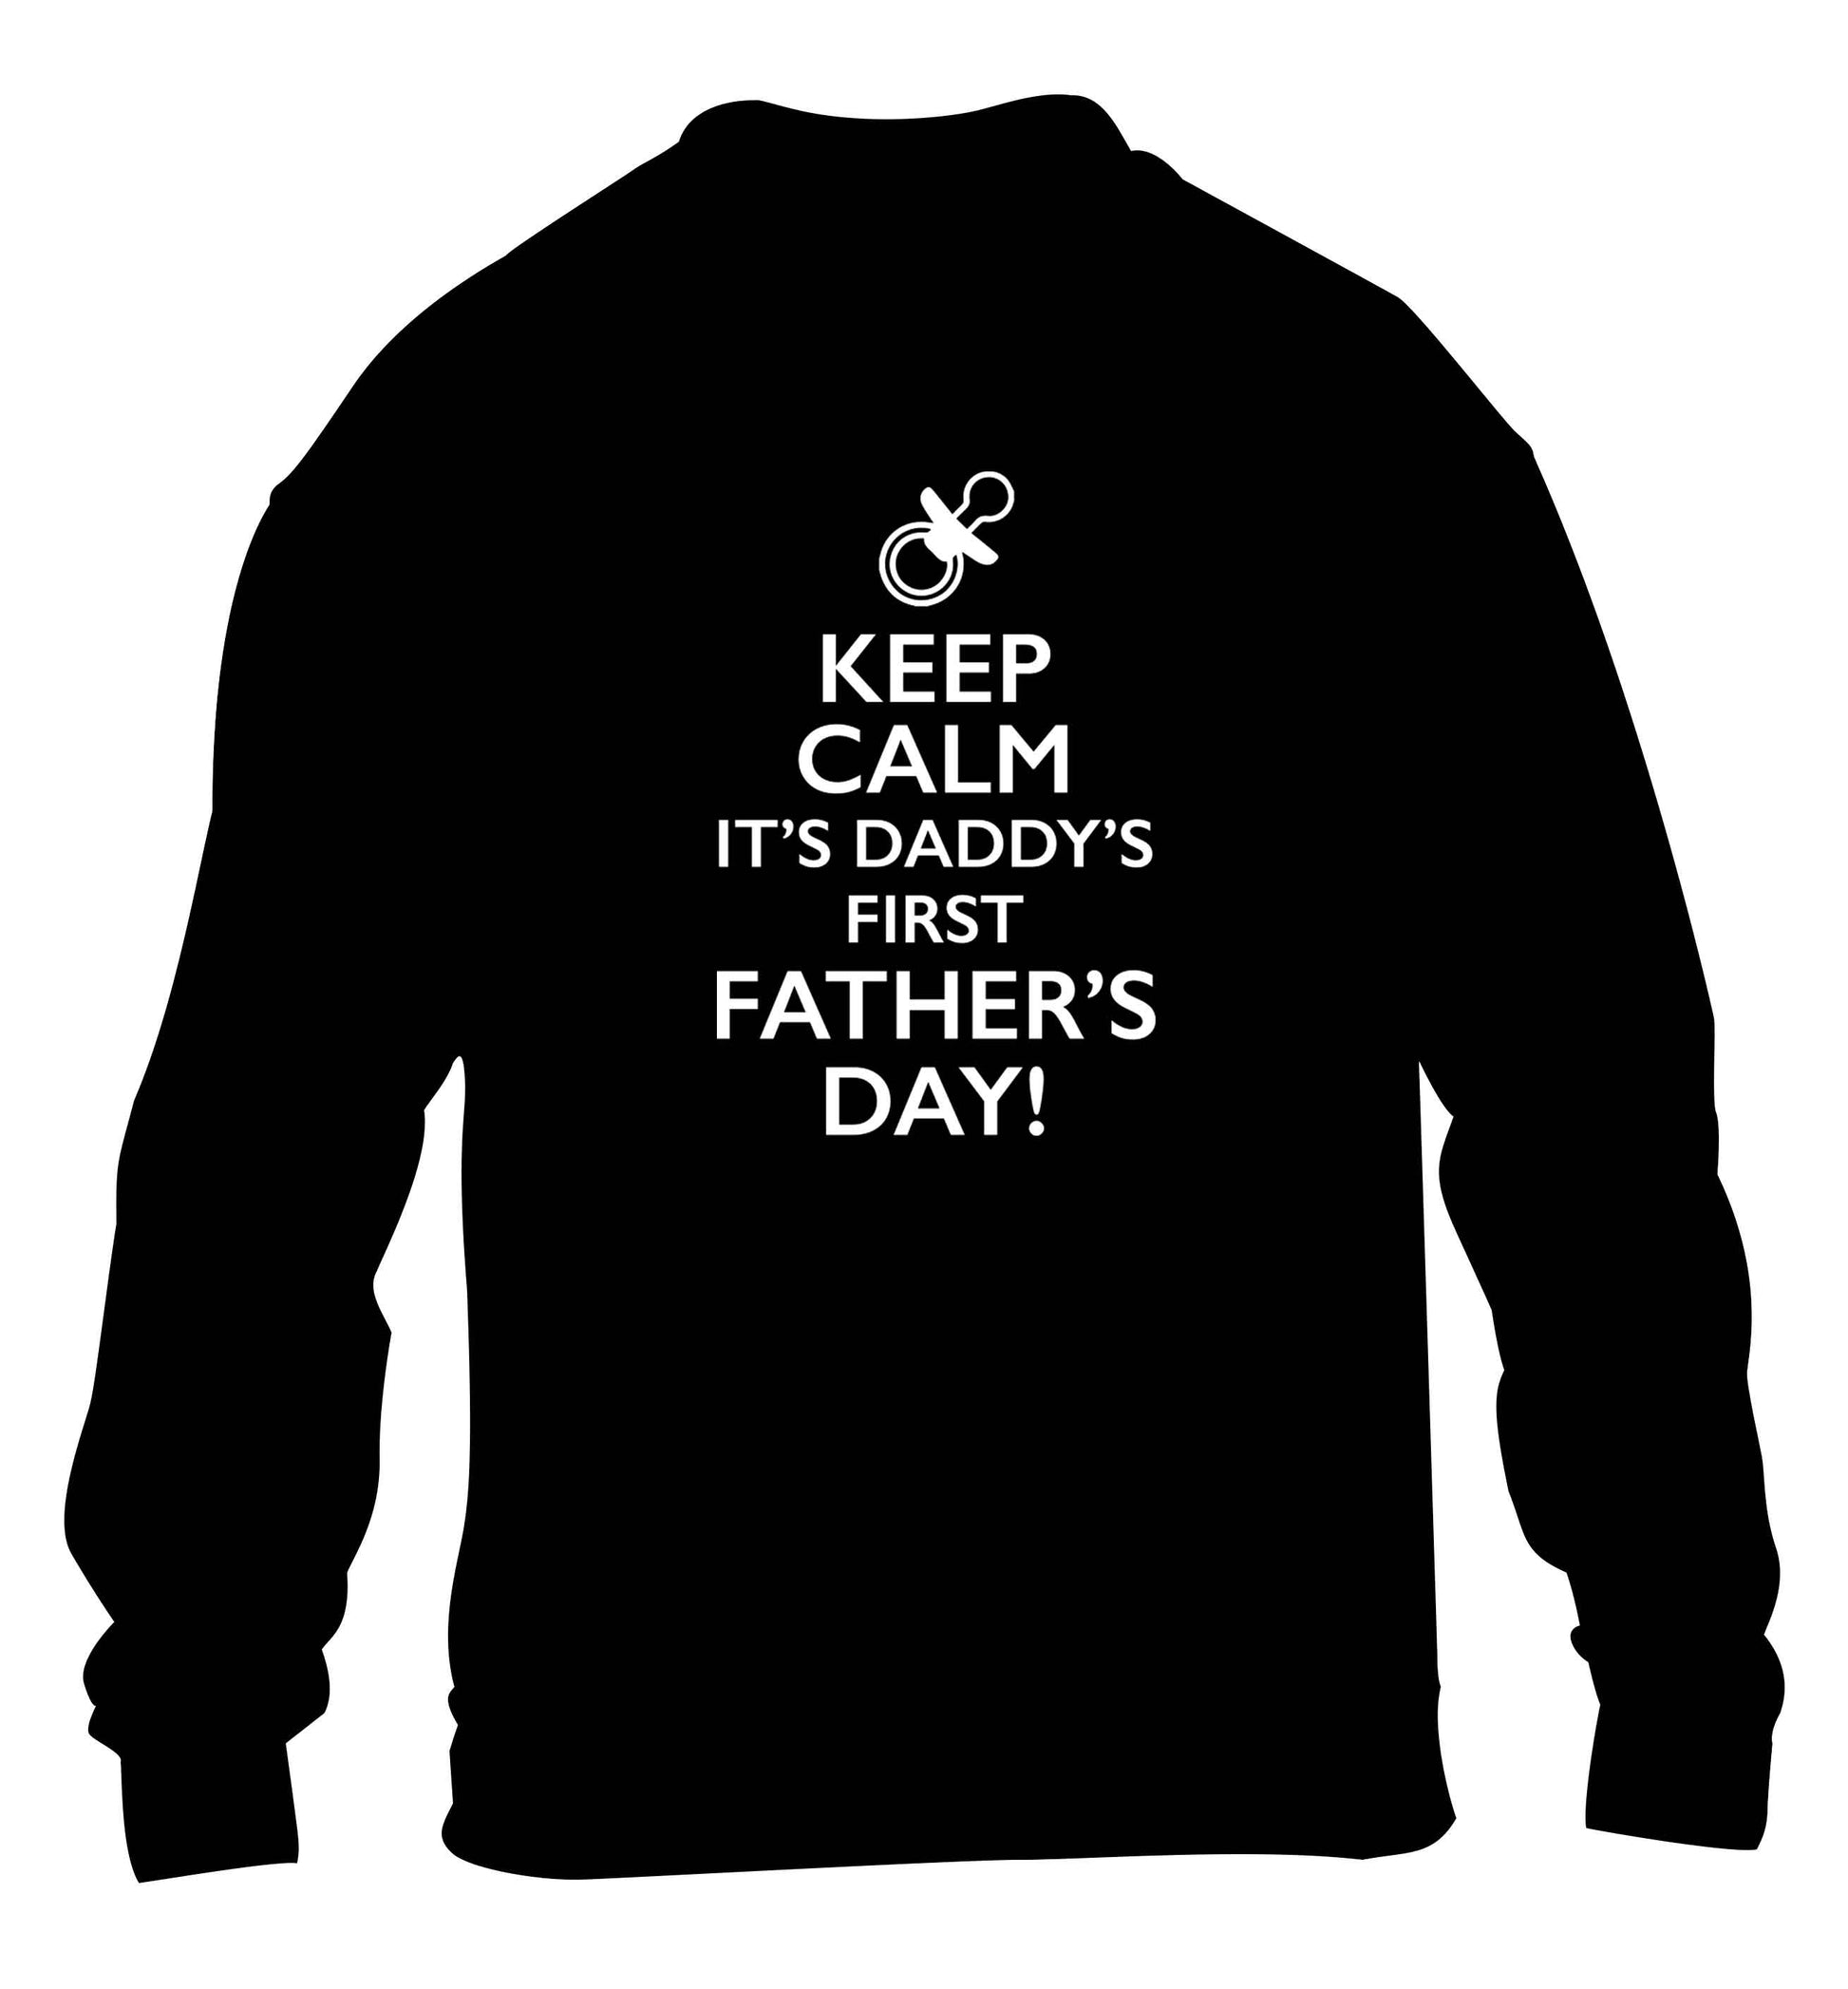 Keep calm it's daddys first father's day children's black sweater 12-13 Years